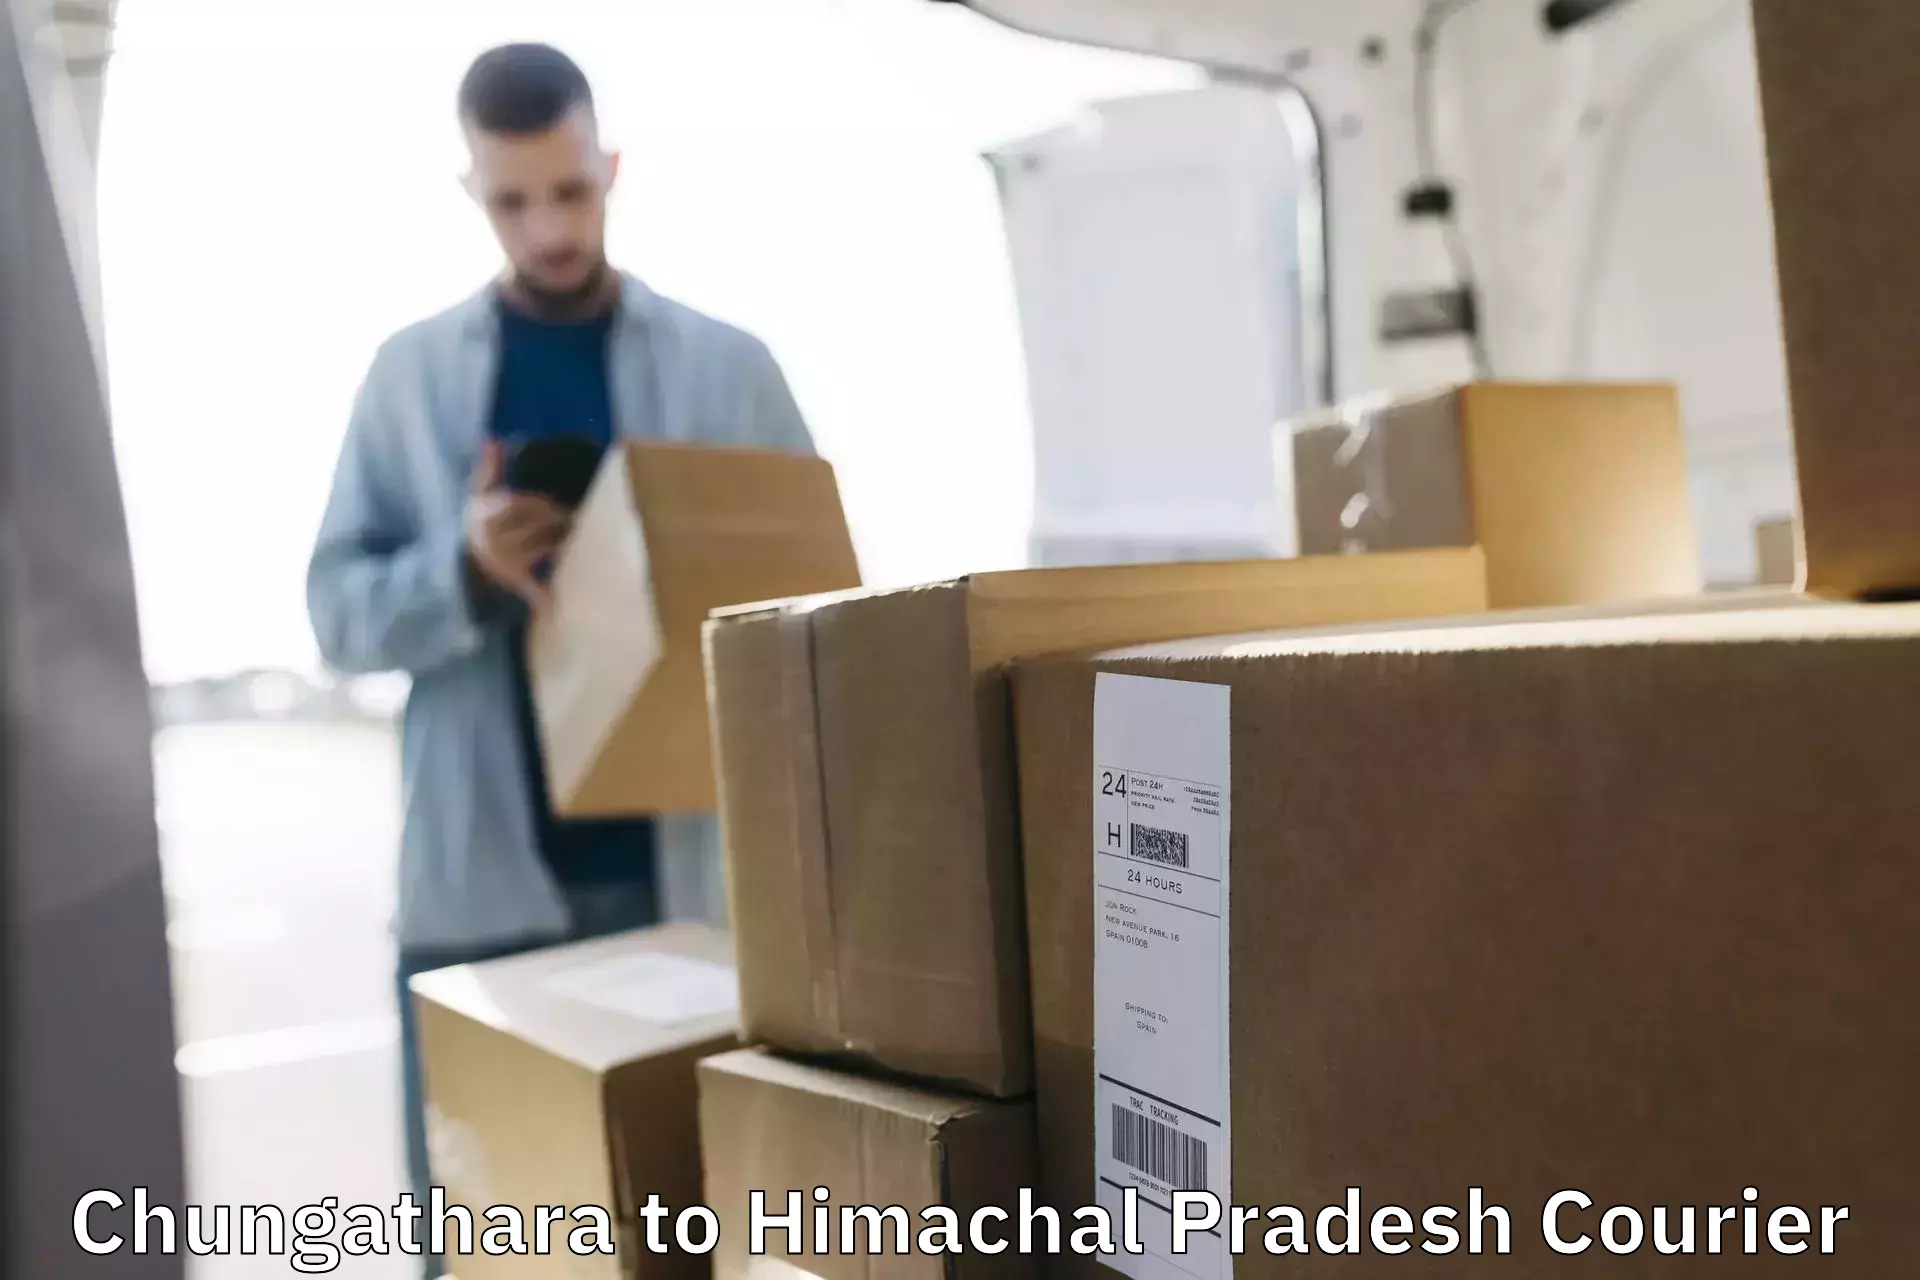 Efficient order fulfillment in Chungathara to Gagret